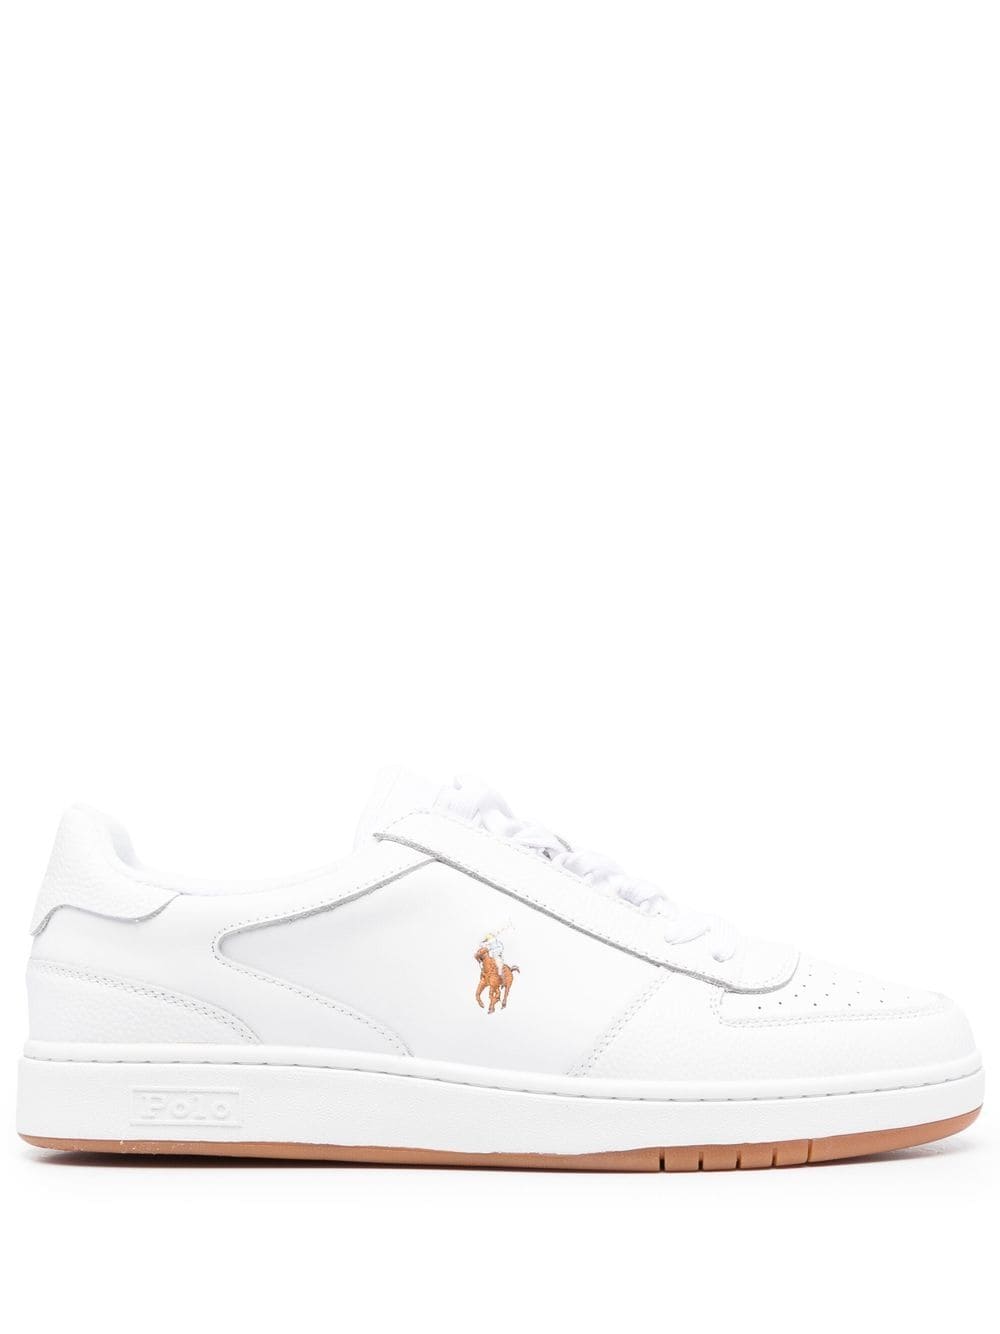 Polo Ralph Lauren Polo Court low-top leather sneakers - White von Polo Ralph Lauren